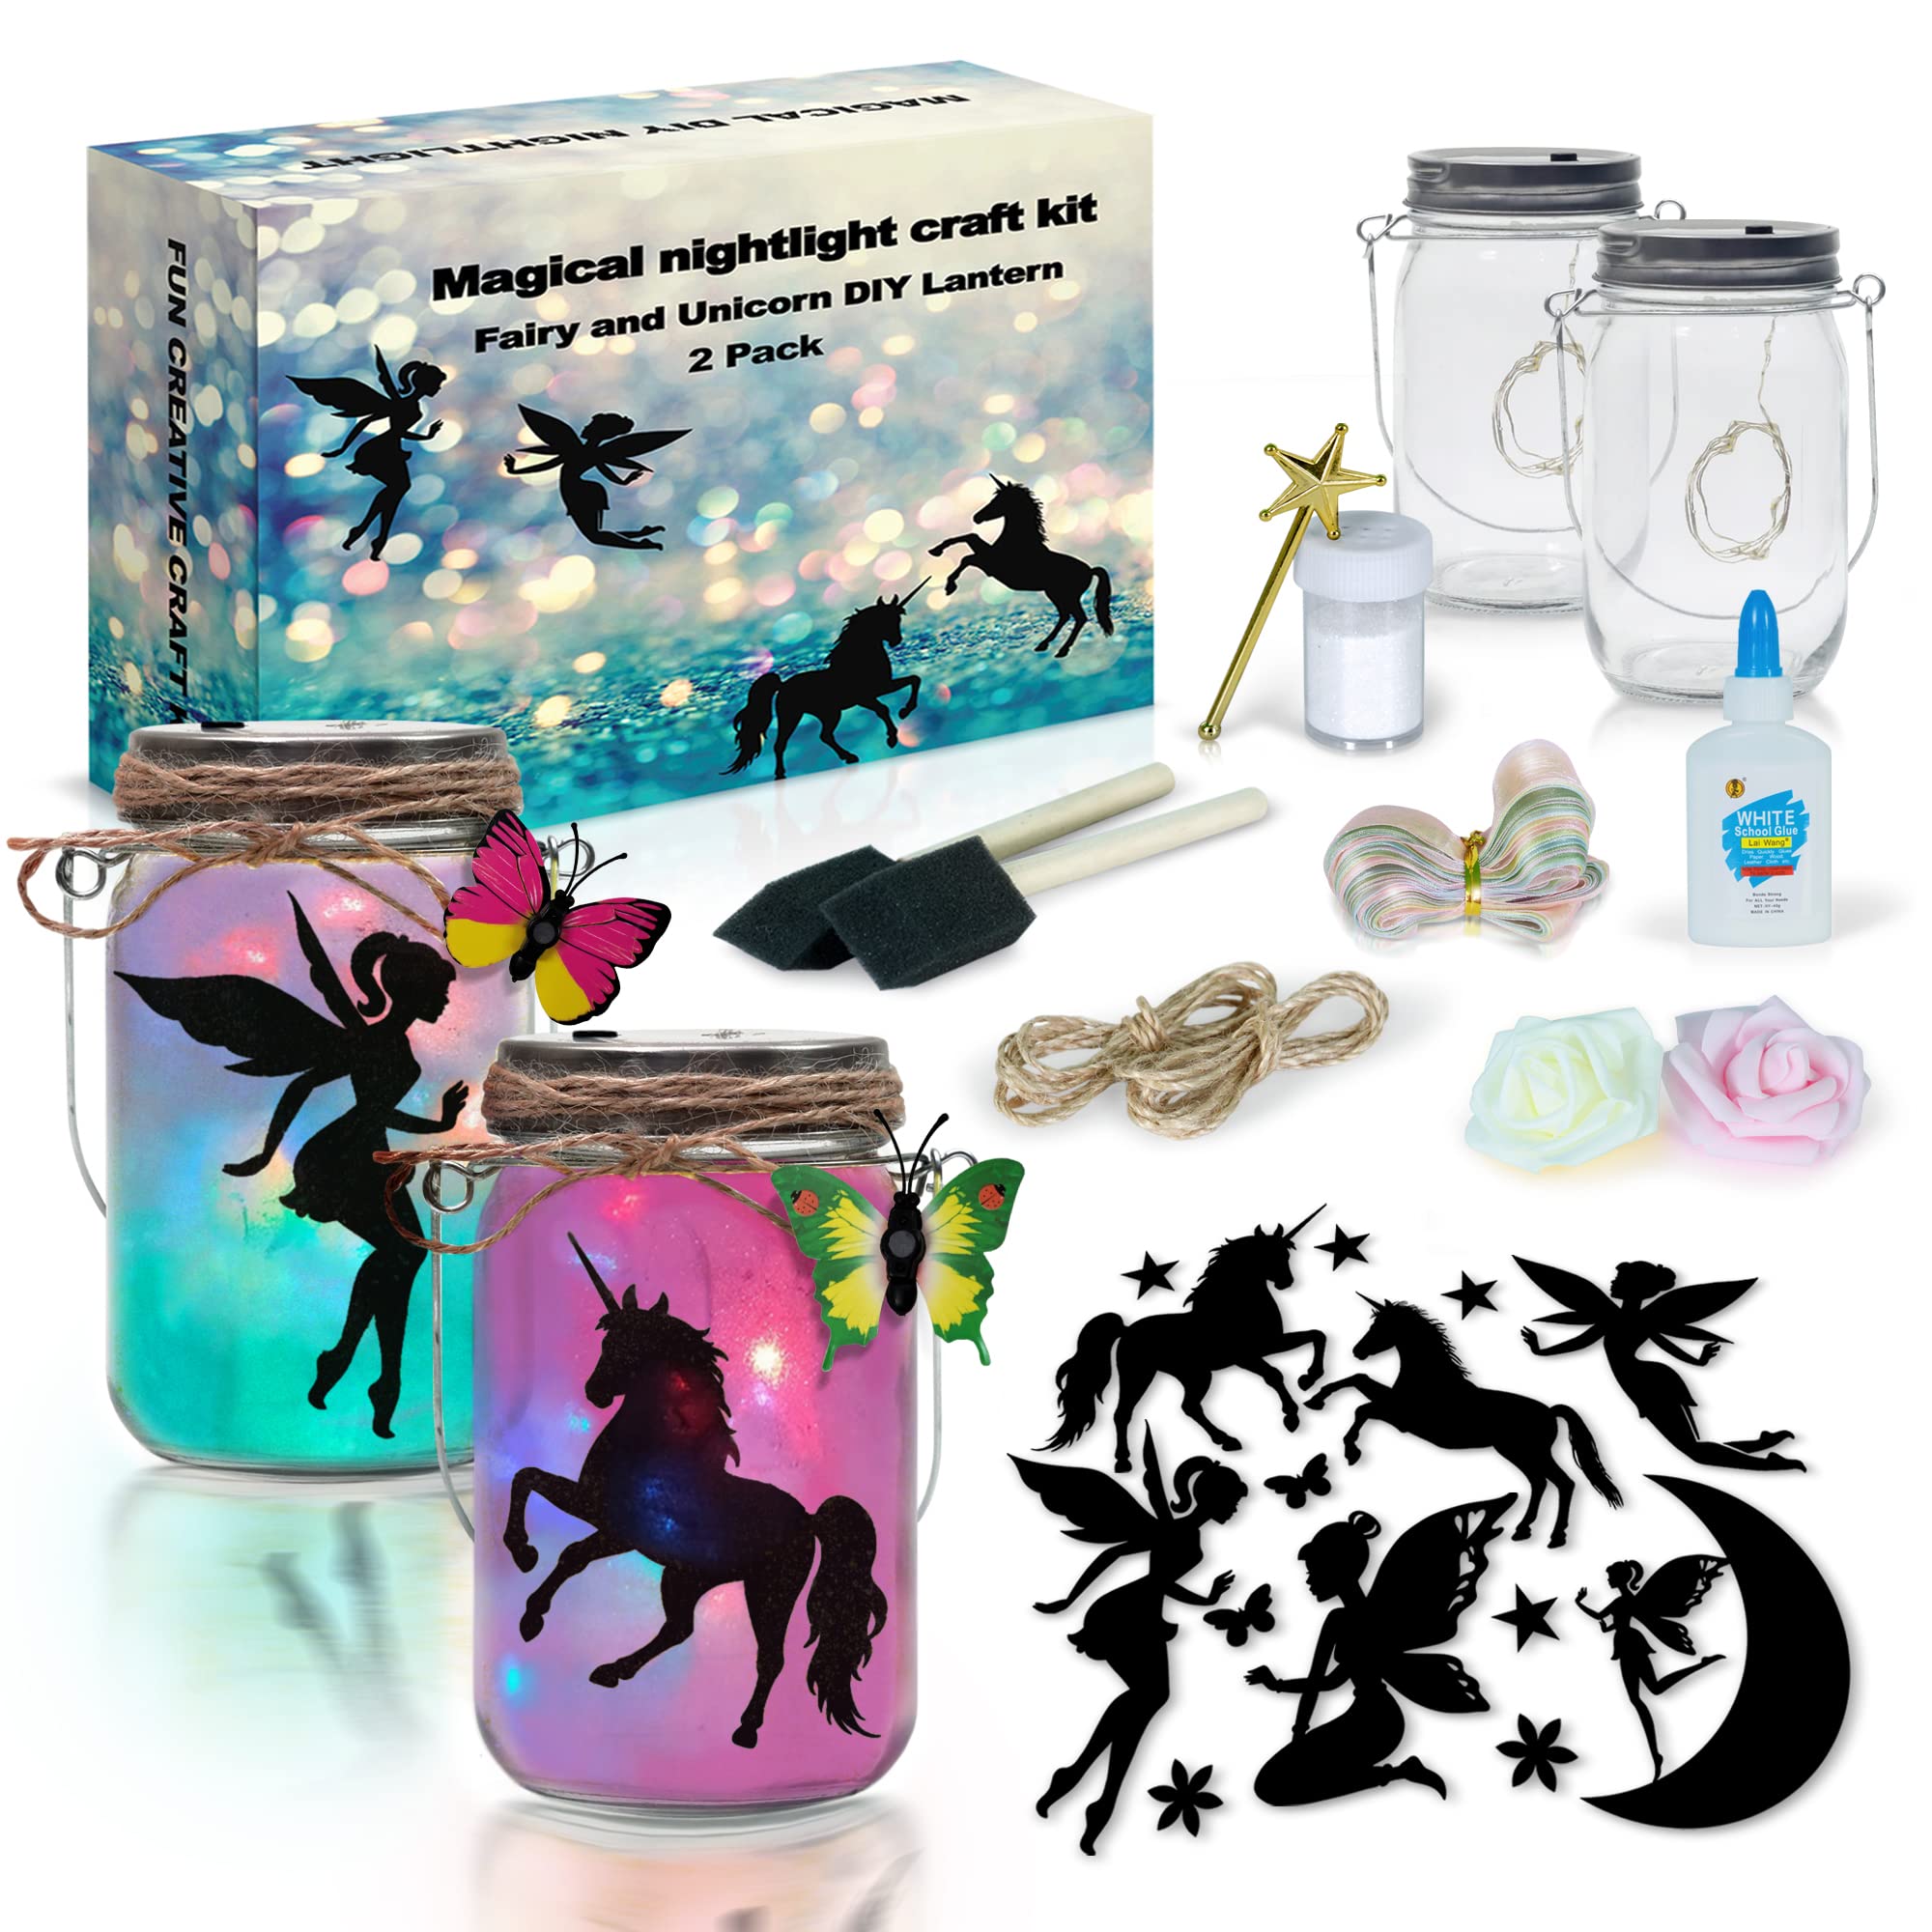 2Pepers DIY Fairy and Unicorn Nightlight Craft Kit (2 Pack), Fairy Lantern Jars Arts and Crafts for Girls, Make Your Own Unicorn Lamp Decor Craft Project, Fairy and Unicorn Gifts for Kids.